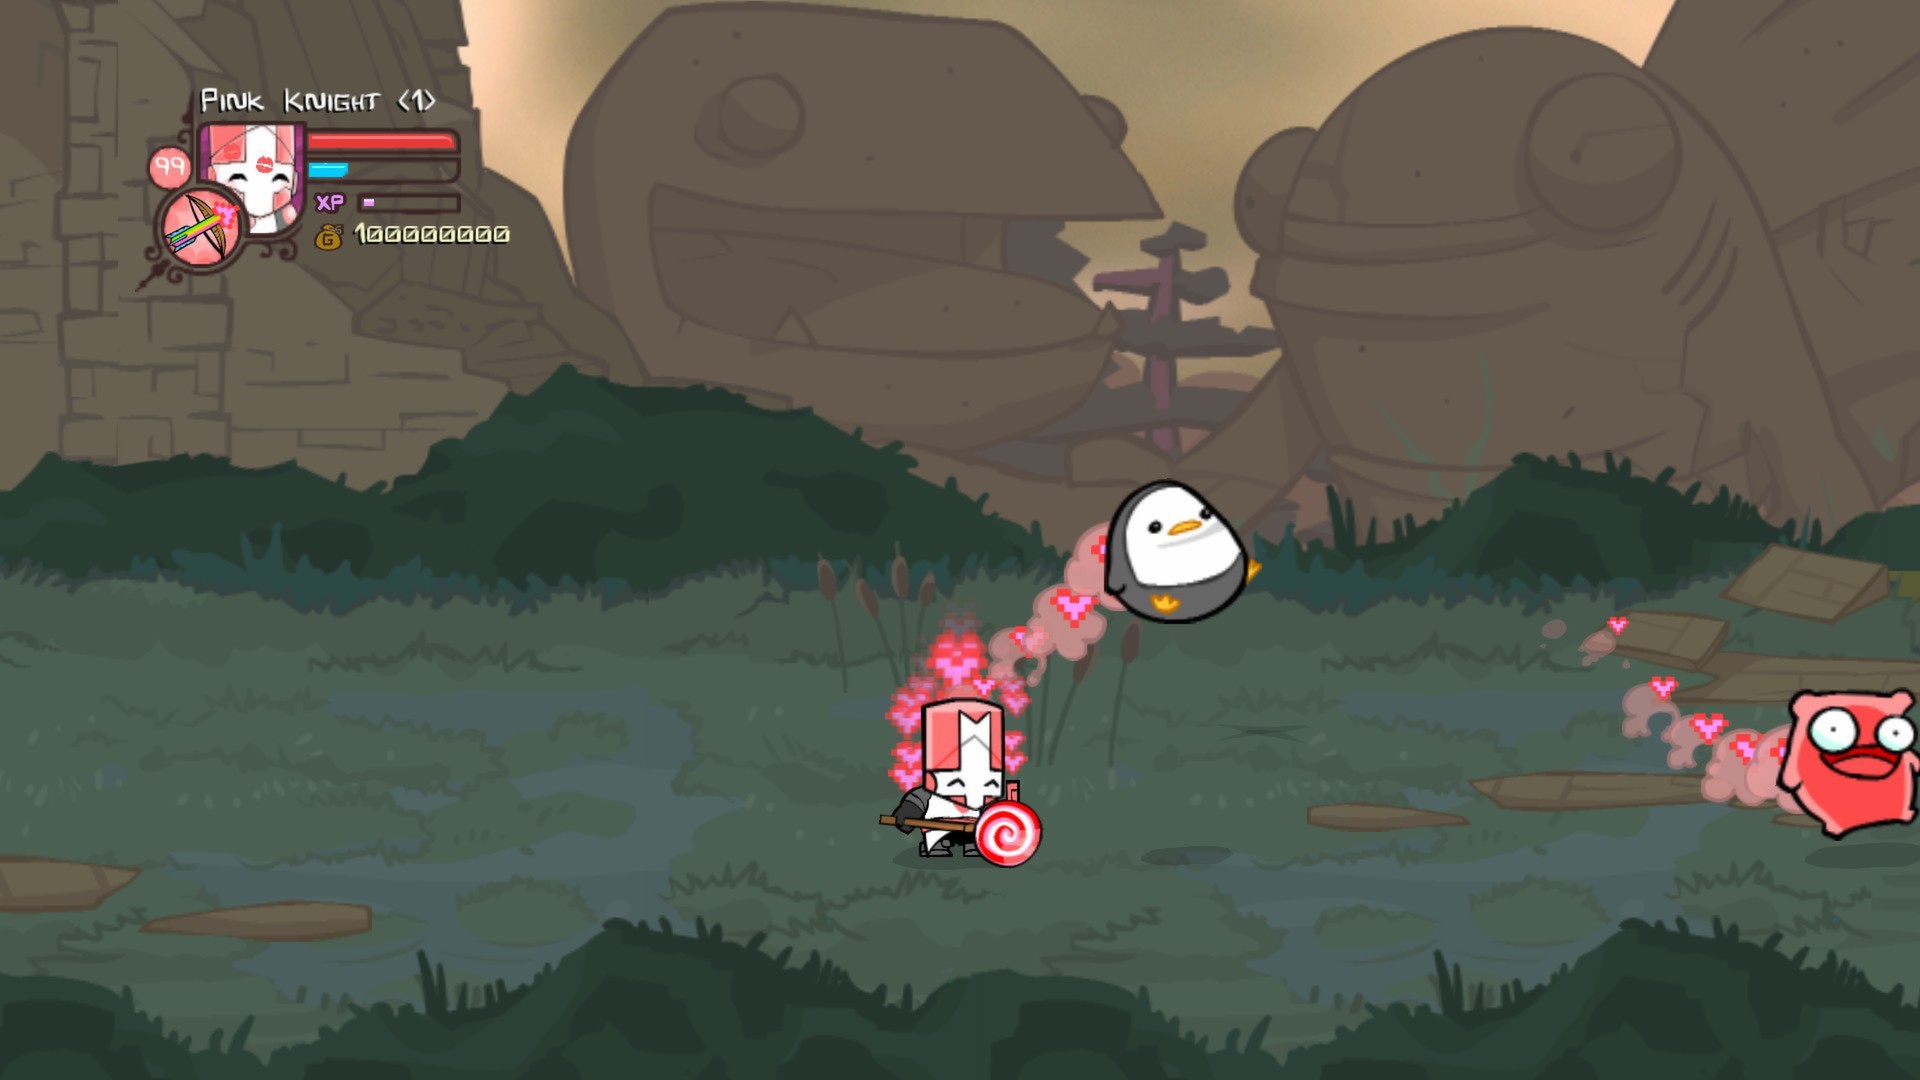 Pink Knight screenshots, images and pictures - Giant Bomb